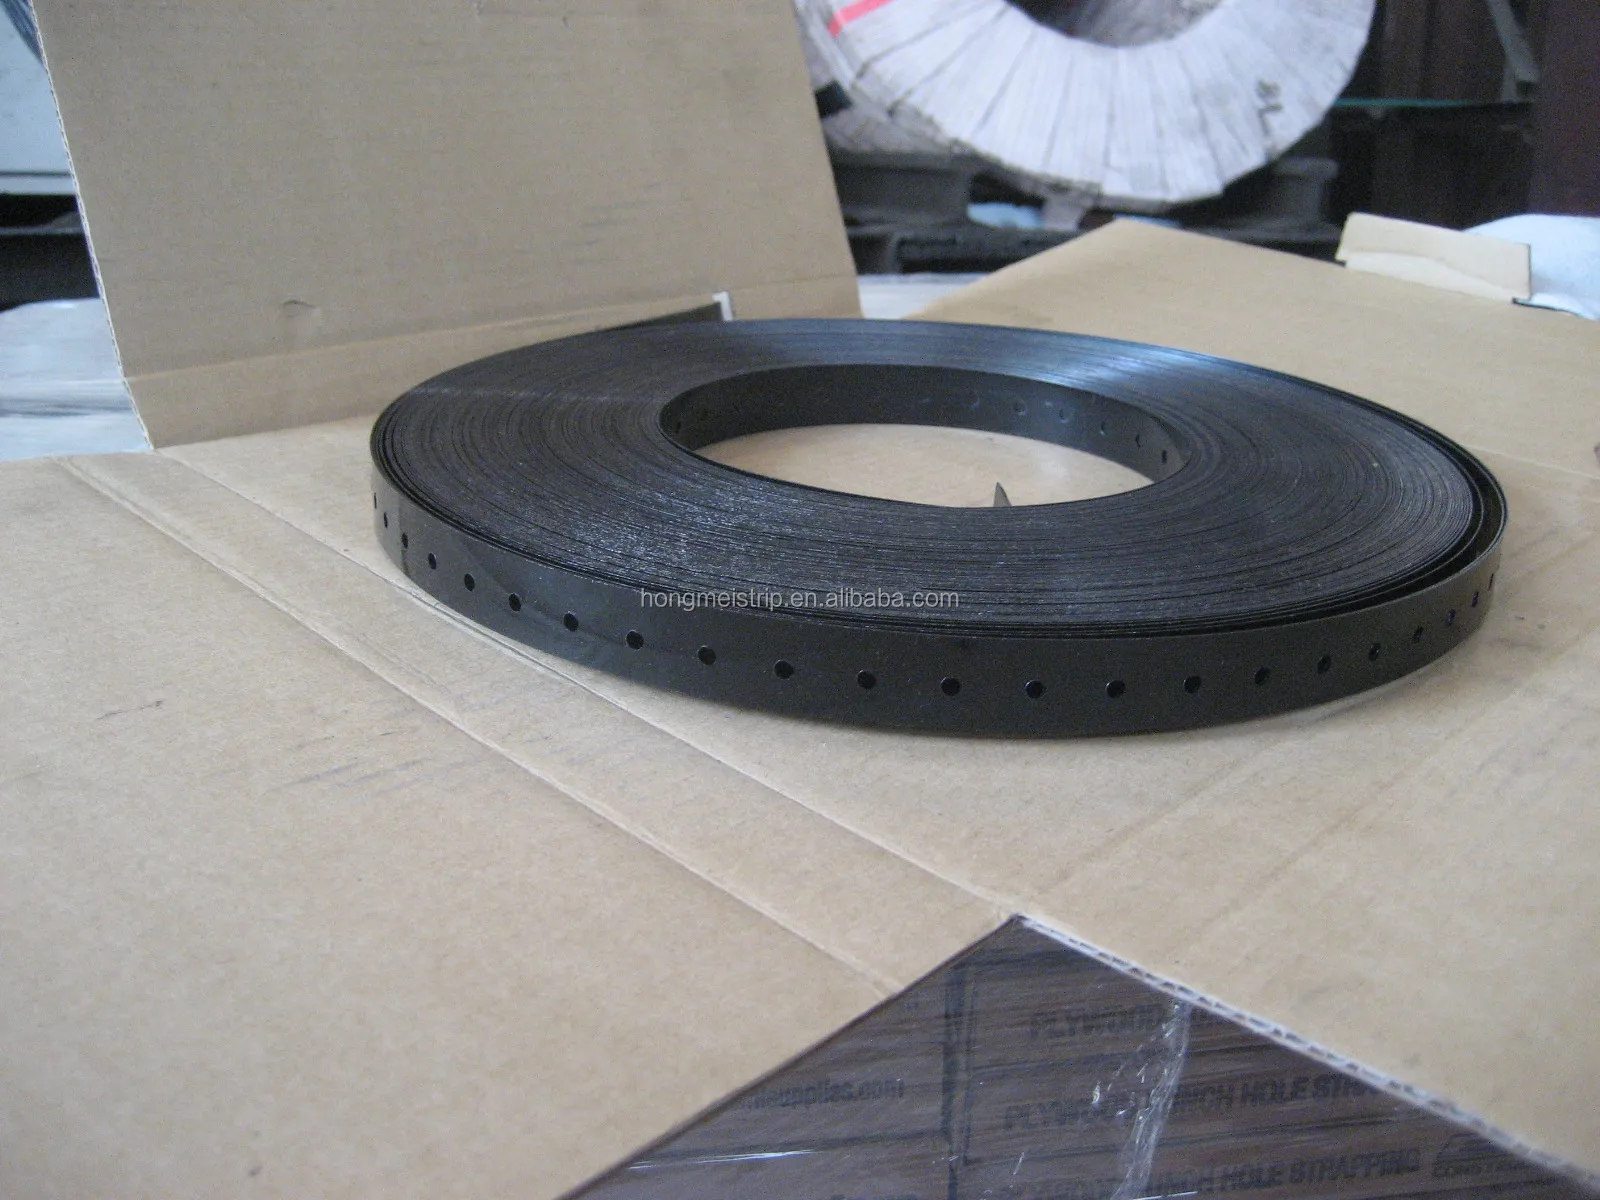 lowest hoop iron perforated metal strip steel strapping with holes ,punched hole steel strapping